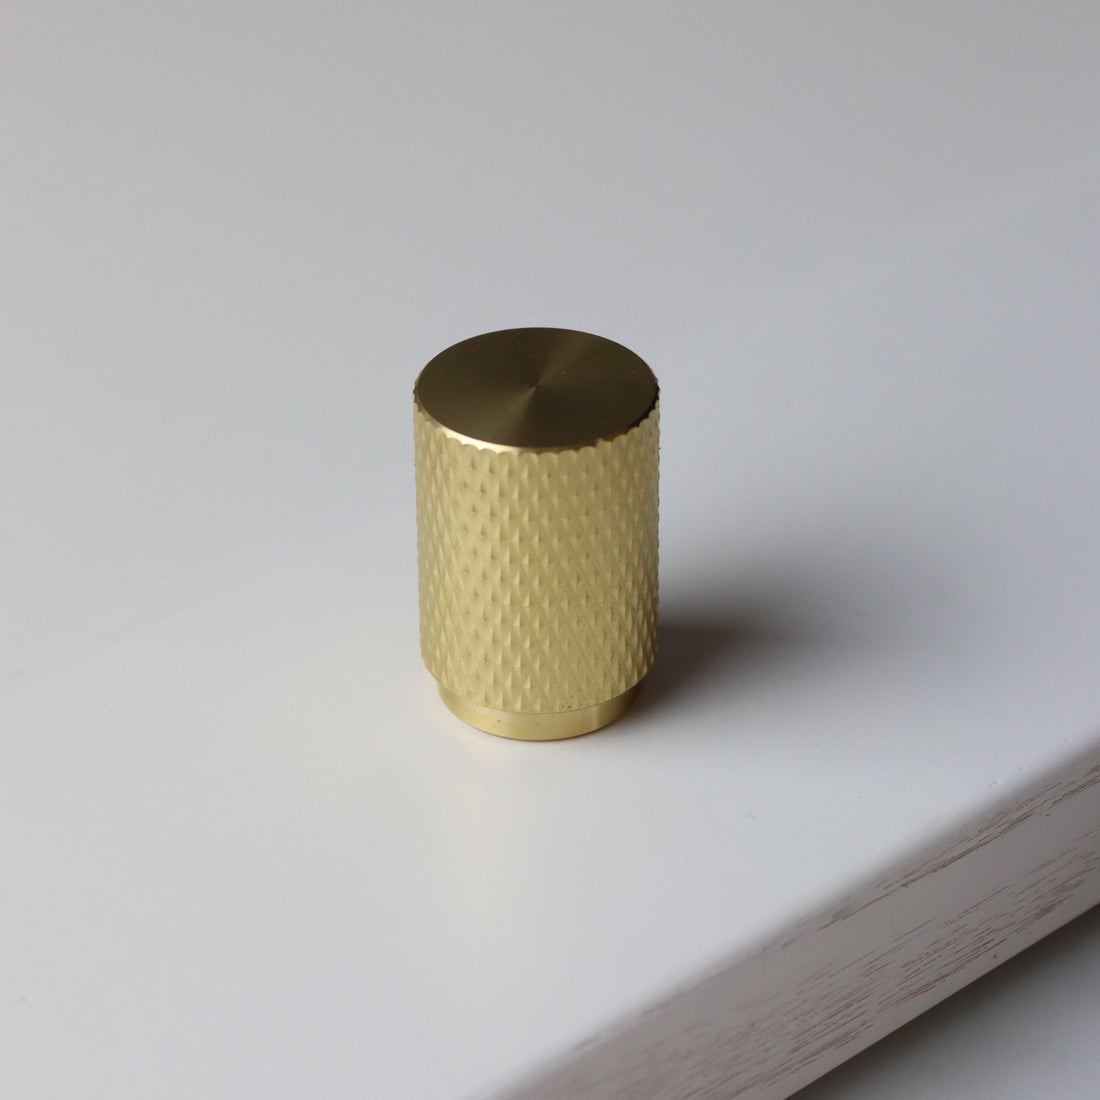 ives knurled pull cabinetry knob in brass